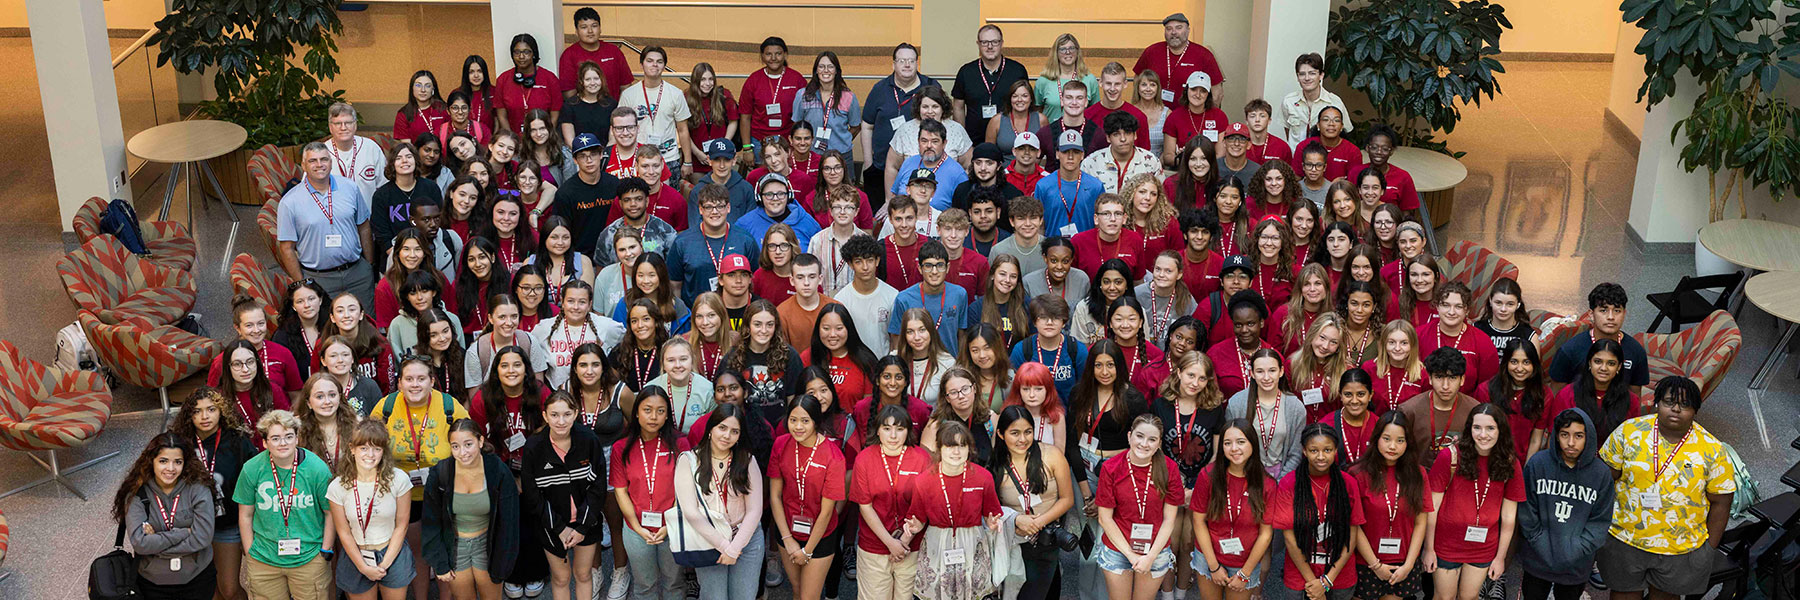 Large group photo of HSJI students in franklin hall commons